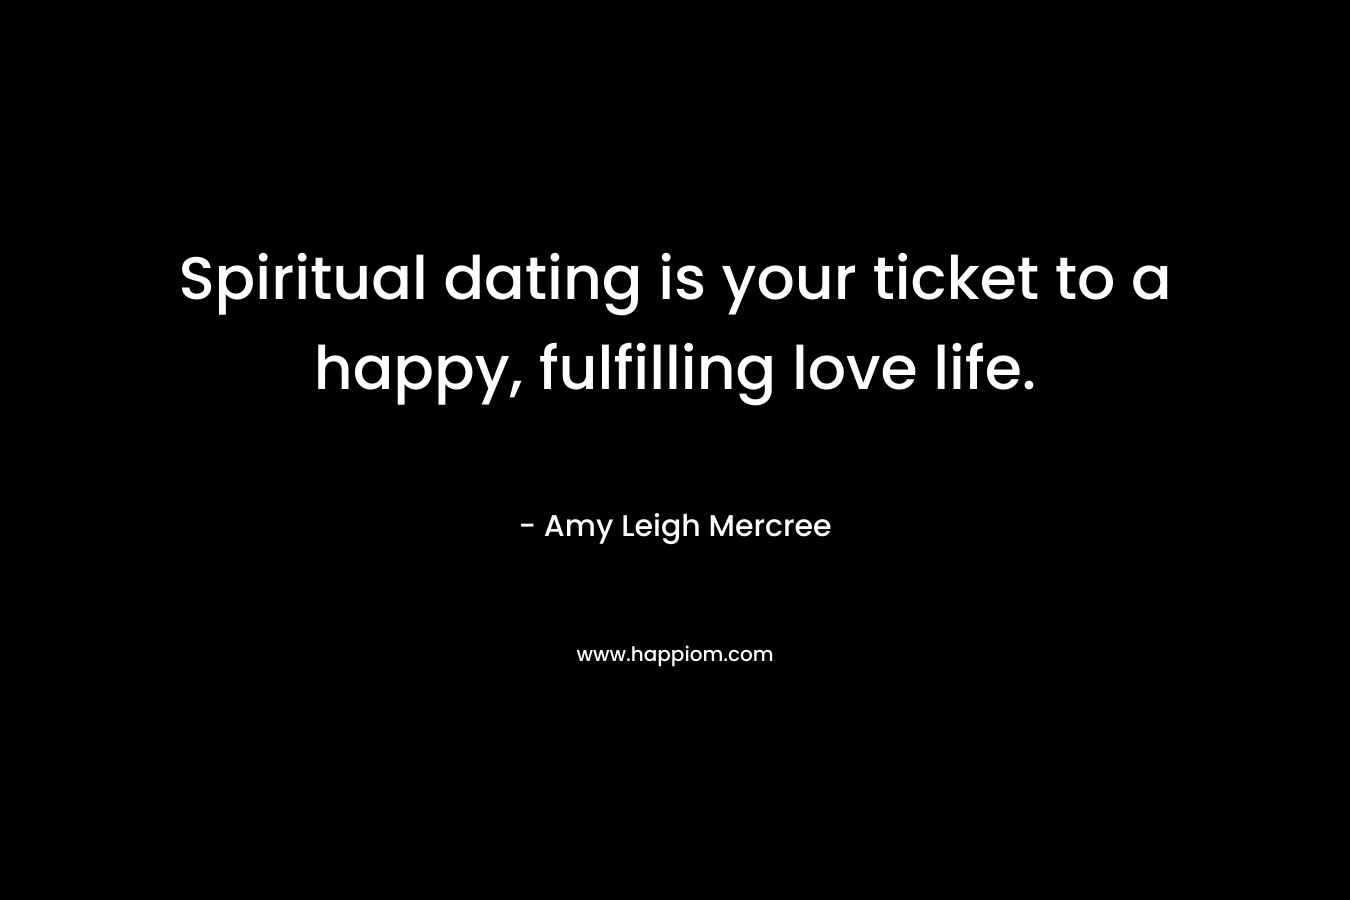 Spiritual dating is your ticket to a happy, fulfilling love life. – Amy Leigh Mercree